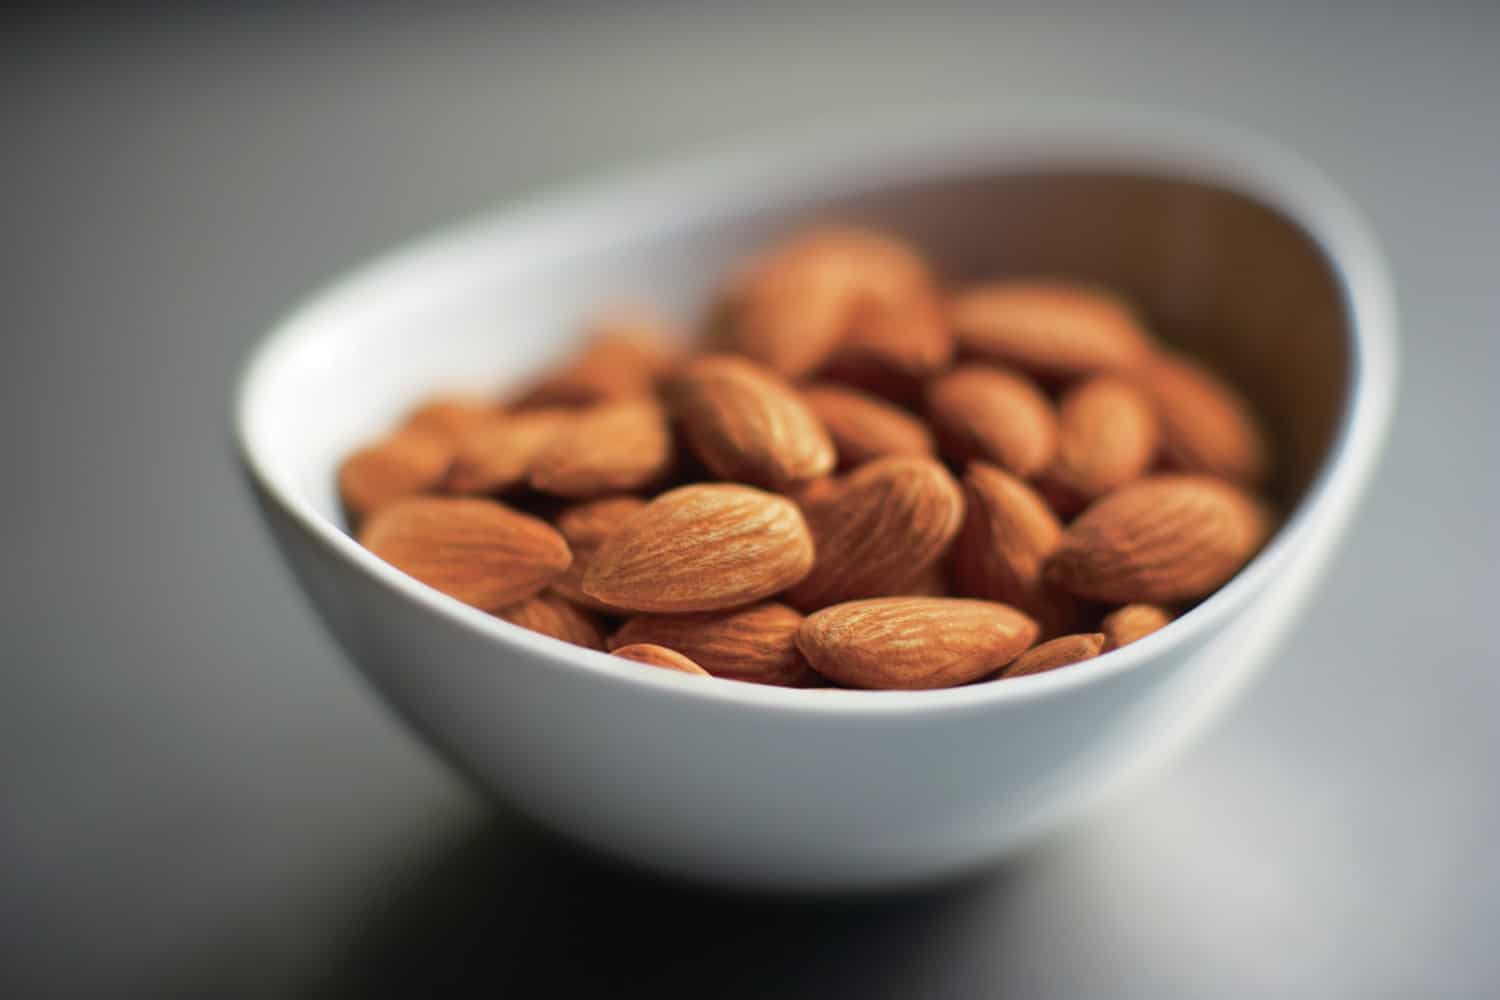 Weight Management: Breaking intermittent fasting with nutritious foods like almonds